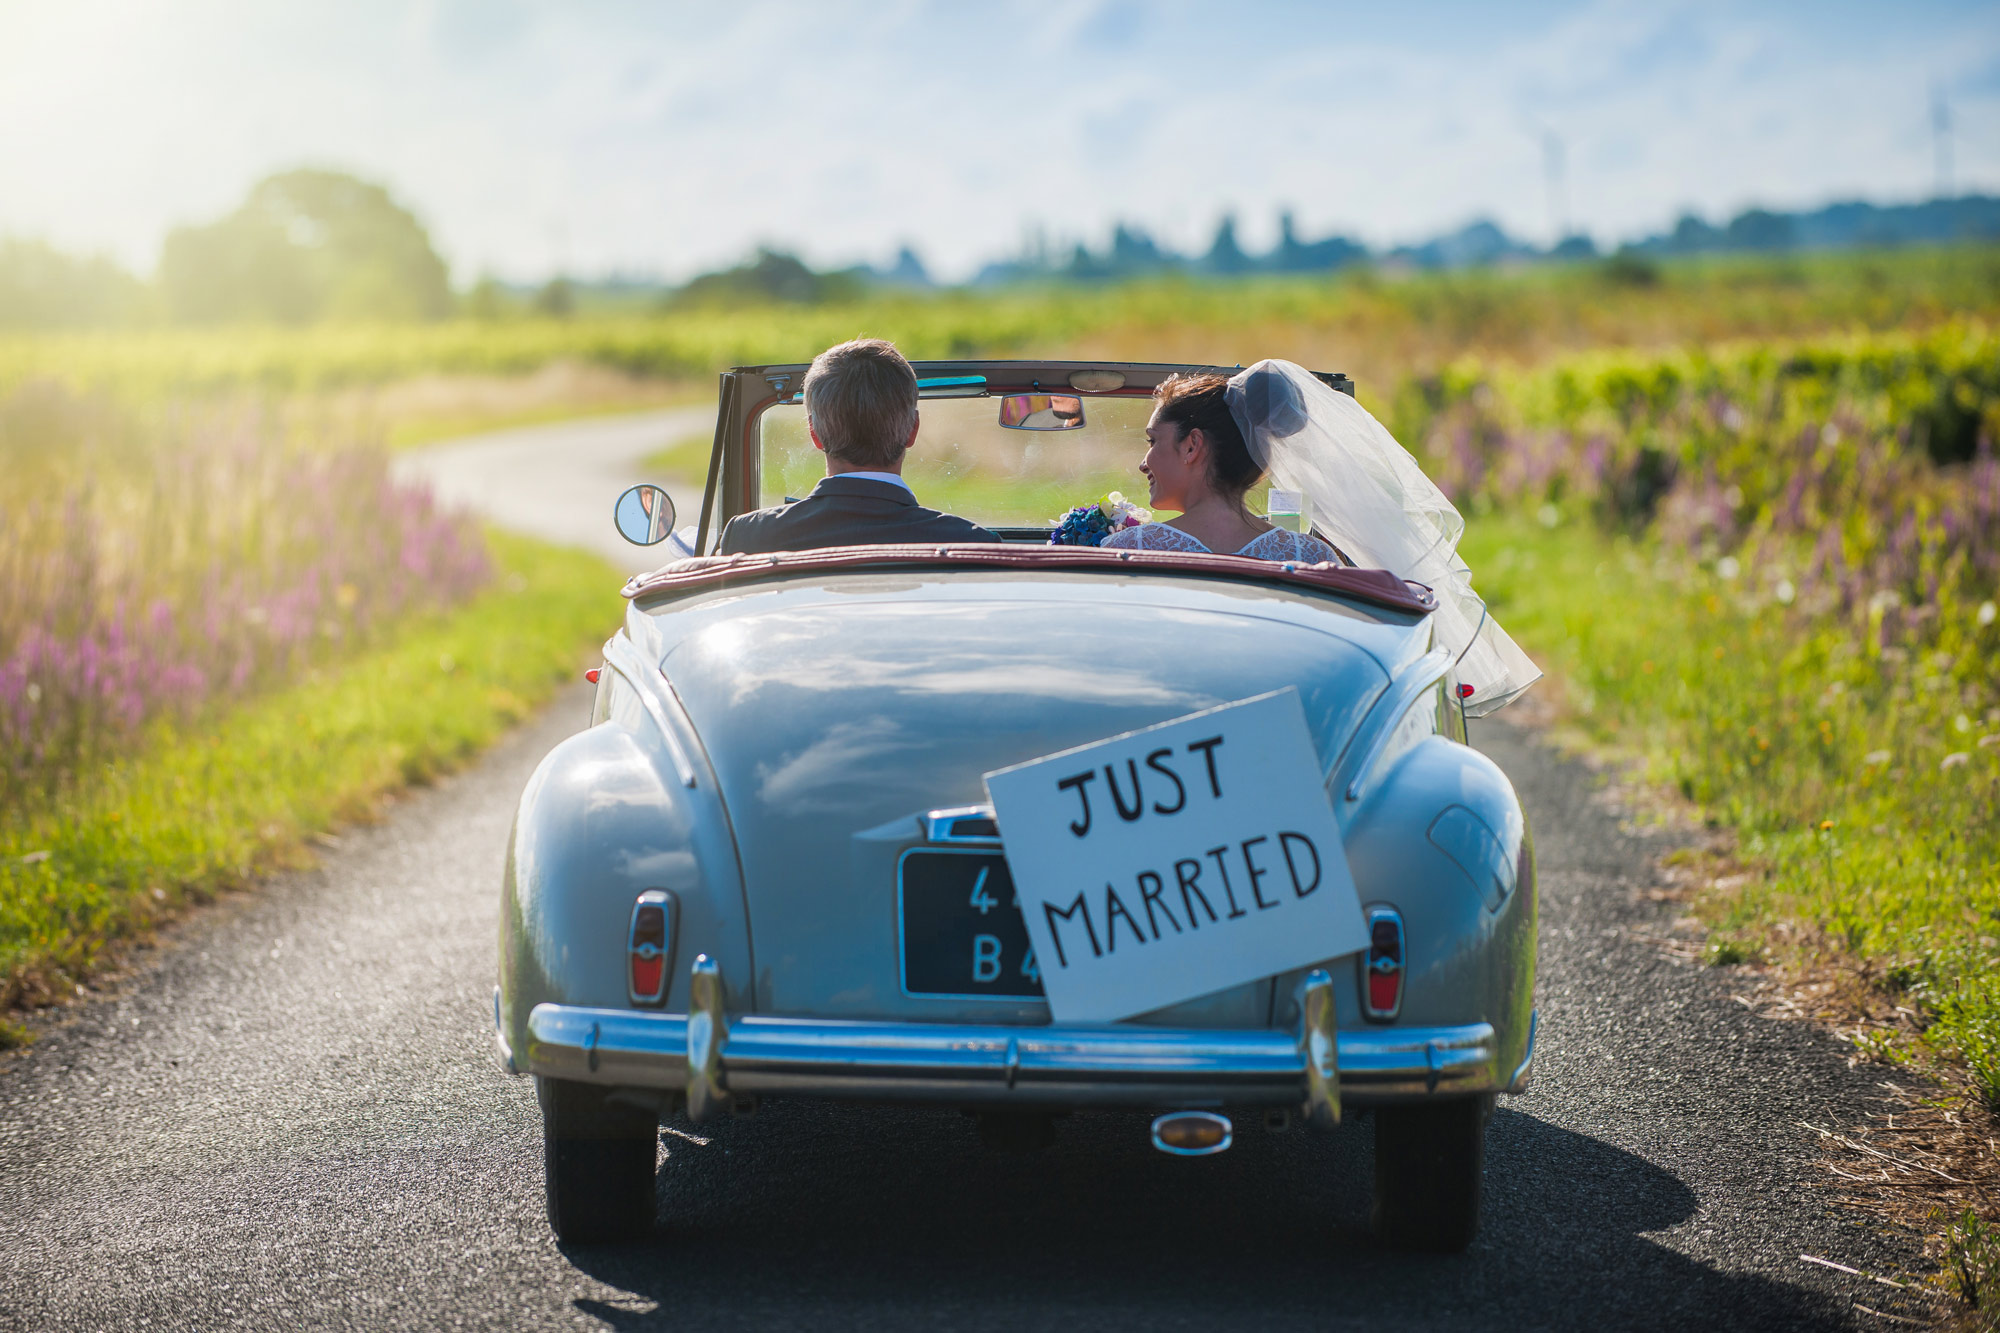 Couple drives down road with just married sign on back of convertible classic car.